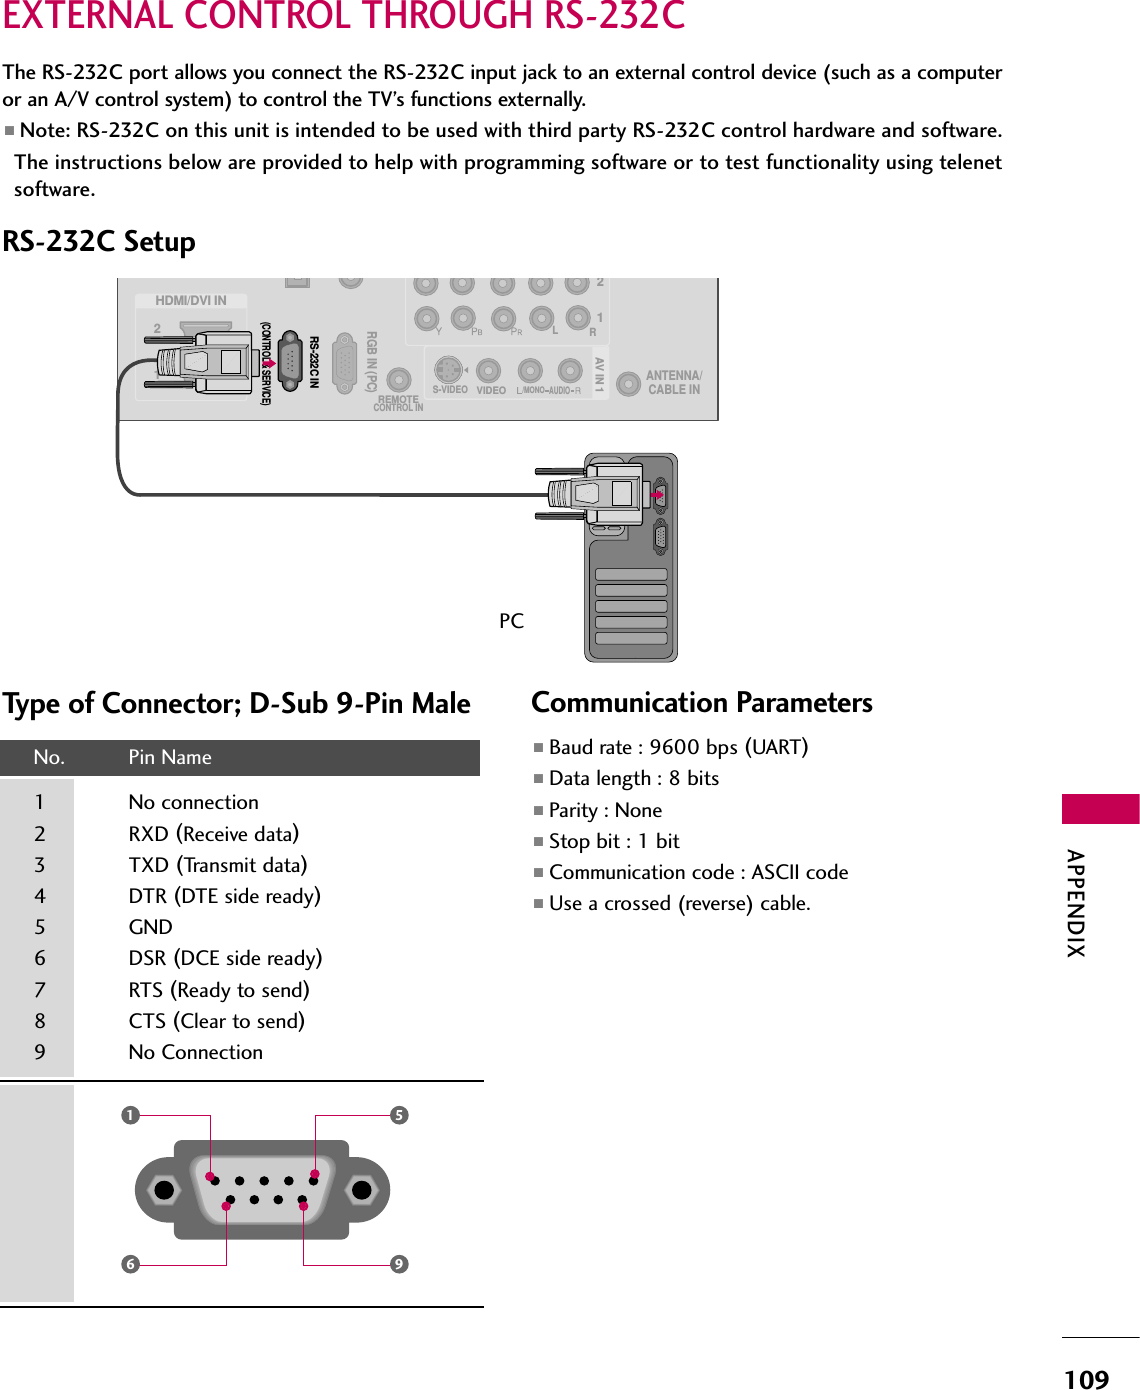 APPENDIX109EXTERNAL CONTROL THROUGH RS-232CRS-232C SetupThe RS-232C port allows you connect the RS-232C input jack to an external control device (such as a computeror an A/V control system) to control the TV’s functions externally.■Note: RS-232C on this unit is intended to be used with third party RS-232C control hardware and software.The instructions below are provided to help with programming software or to test functionality using telenetsoftware.12LRRGB IN (PC)REMOTECONTROL INAUDIOVIDEOS-VIDEO/MONOAV IN 1HDMI/DVI IN 21ANTENNA/CABLE INRS-232C IN(CONTROL &amp; SERVICE)Type of Connector; D-Sub 9-Pin MaleNo.  Pin Name1  No connection2 RXD (Receive data)3 TXD (Transmit data)4 DTR (DTE side ready)5 GND6 DSR (DCE side ready)7 RTS (Ready to send)8 CTS (Clear to send)9 No Connection1659PCCommunication Parameters■Baud rate : 9600 bps (UART)■Data length : 8 bits■Parity : None■Stop bit : 1 bit■Communication code : ASCII code■Use a crossed (reverse) cable.